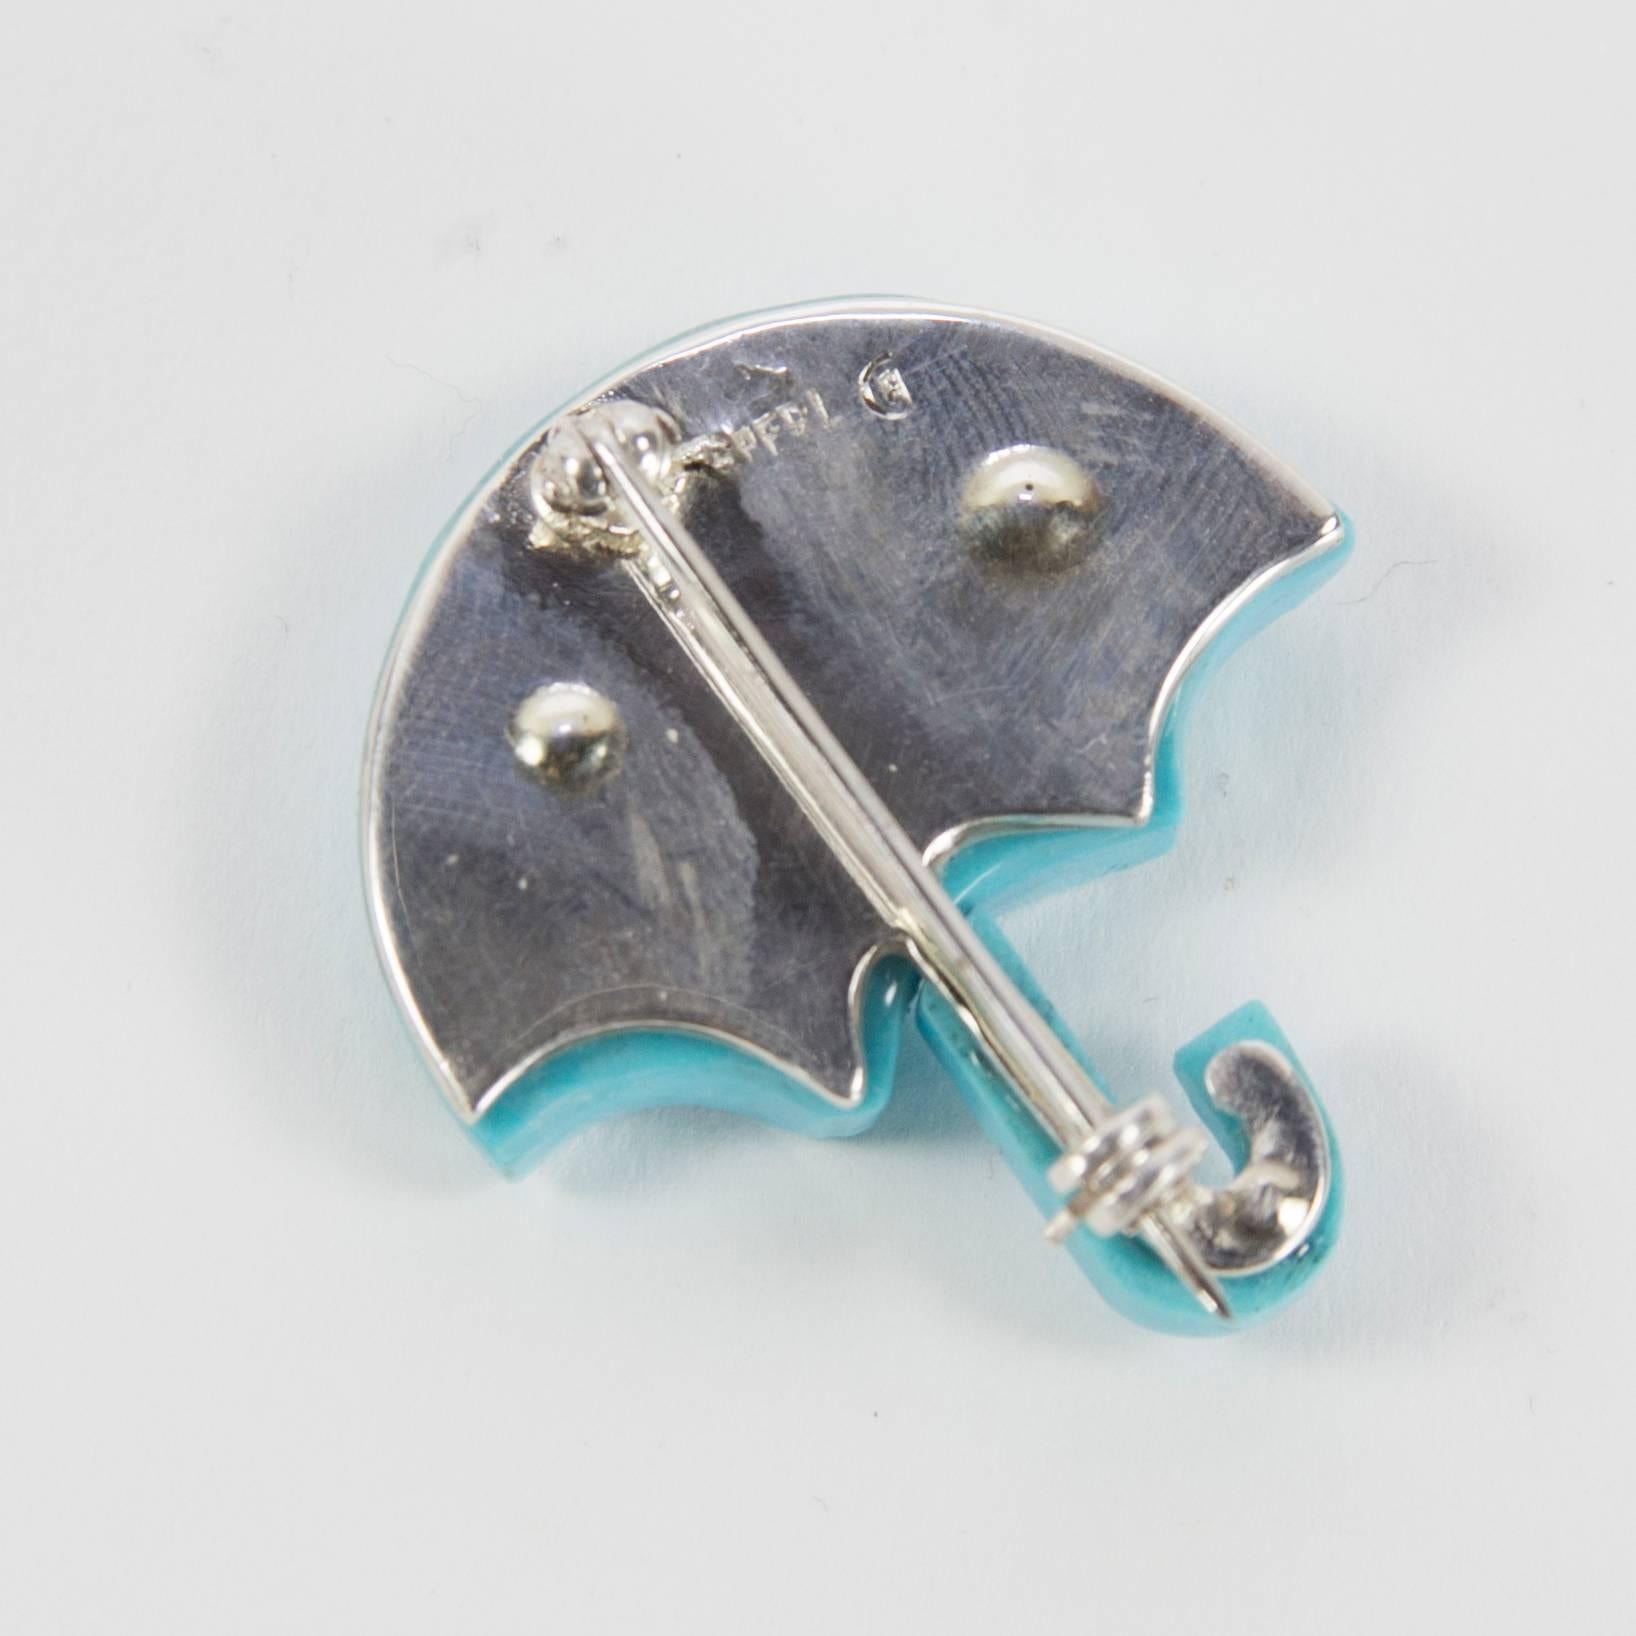 Beautifully Hand crafted reconstituted Turquoise and Sterling Silver brooch in the form of an open umbrella. Marked: STERLING; approx. size: 1.25” x 1.25”; Chic and Unique...Illuminating your Look with Timeless Beauty, rain or shine! 
